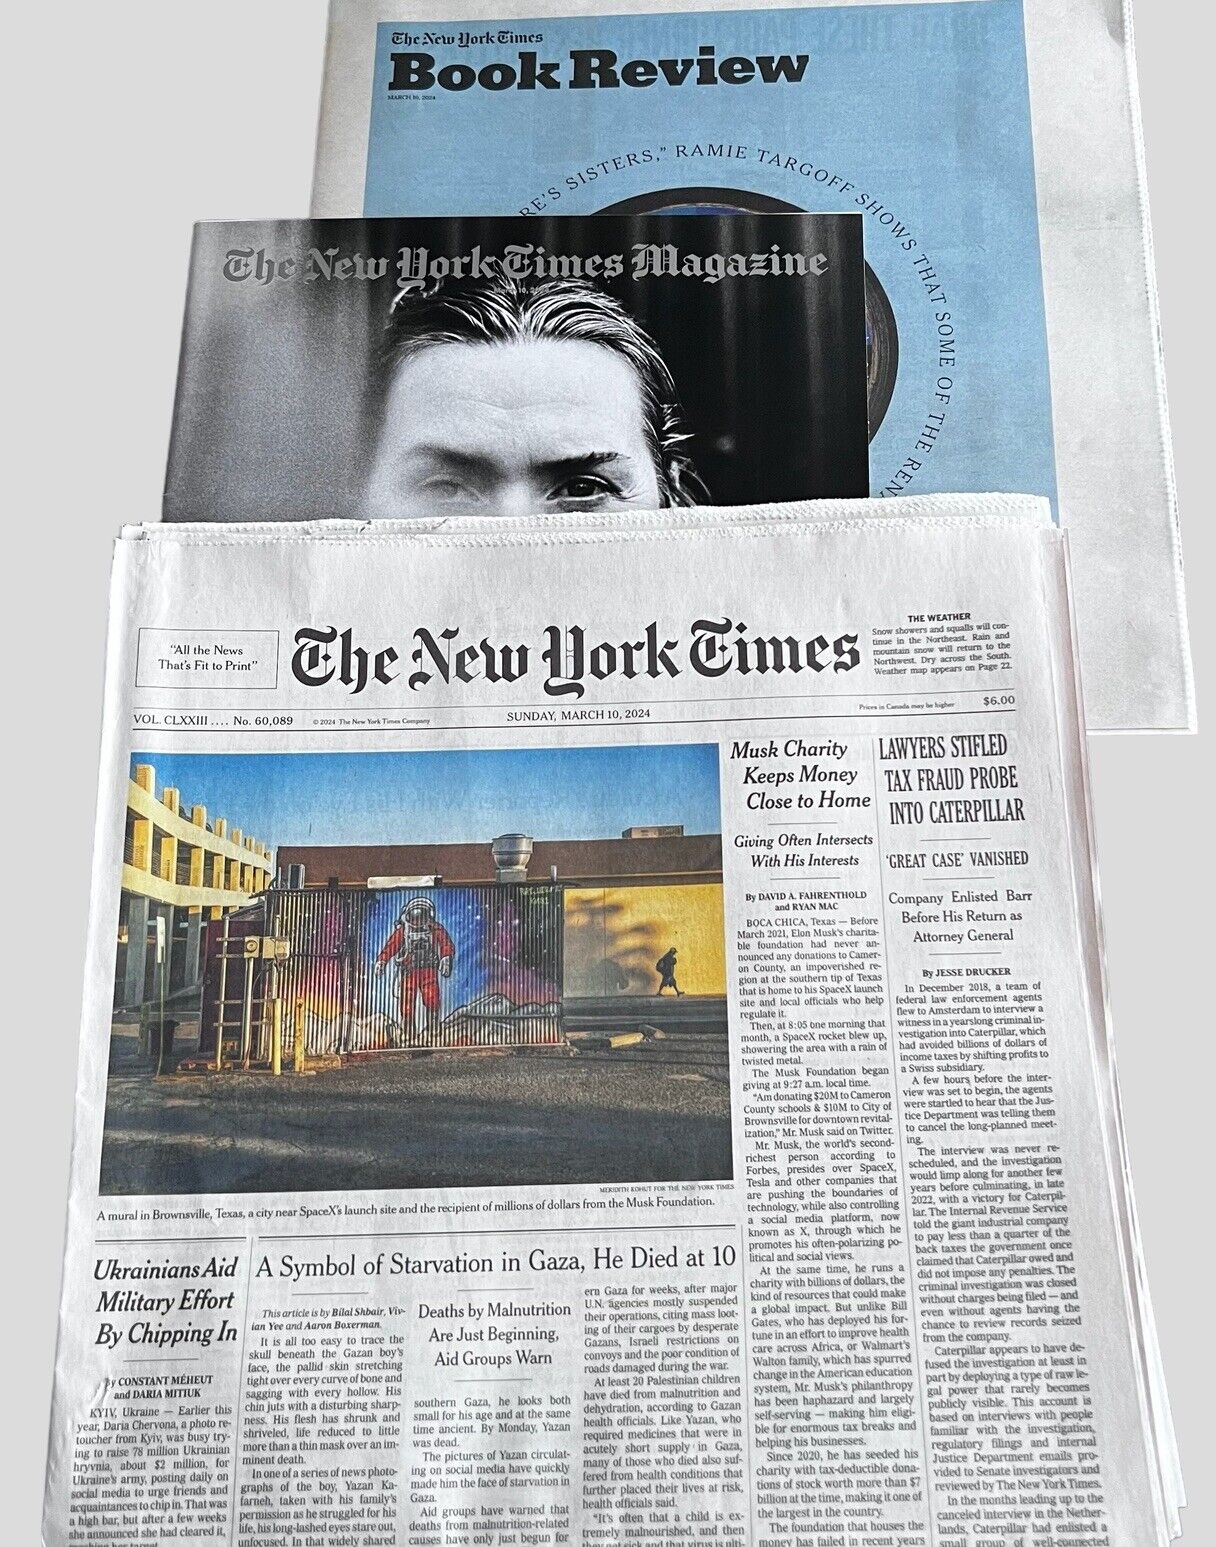 The New York Times Newspaper Sunday March 10 2024 + NYT Magazine + Book Review